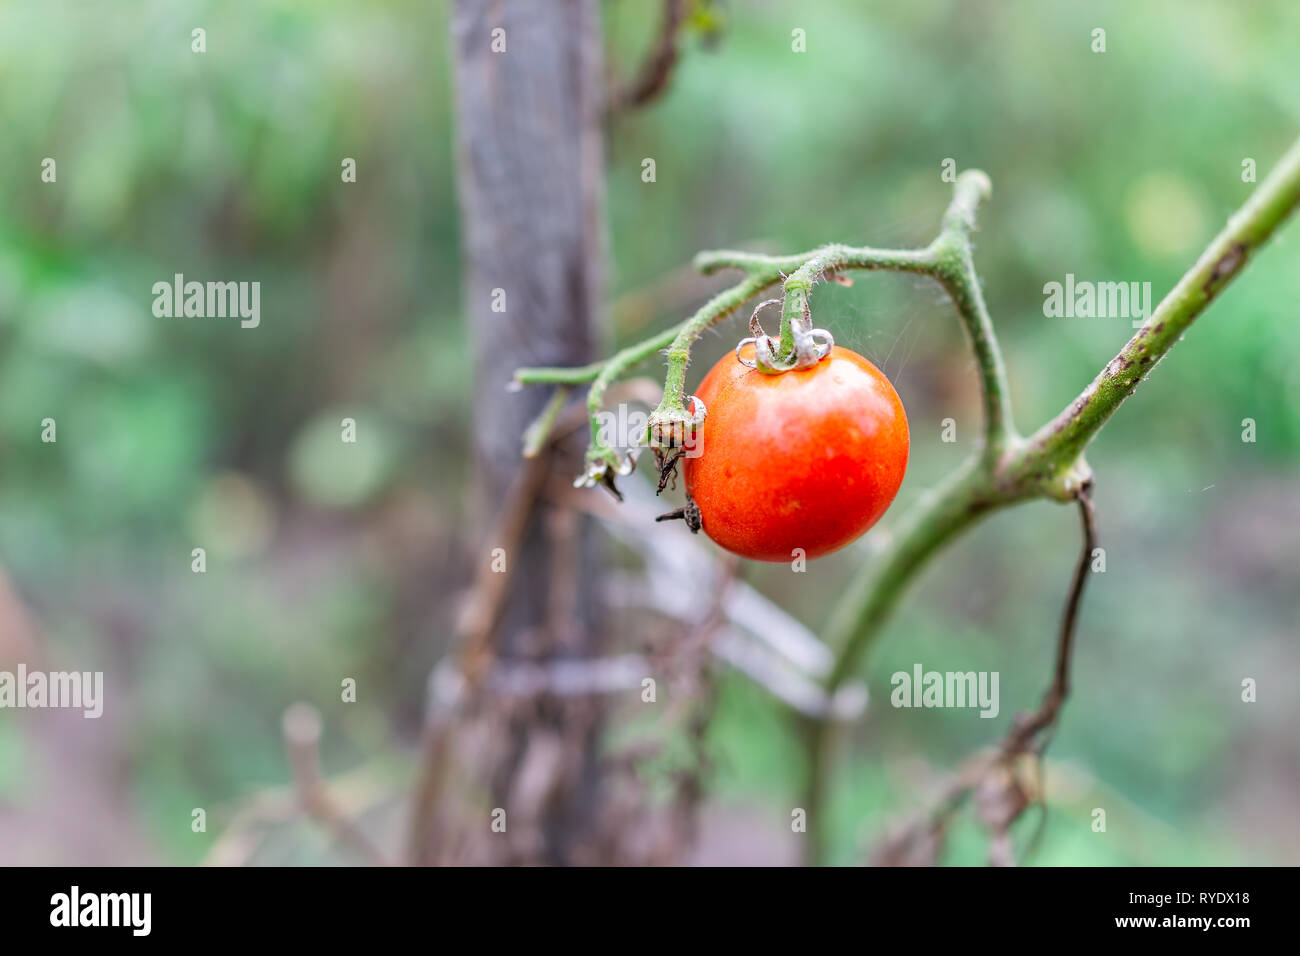 Macro closeup plump ripe wilted orange red colorful tomato hanging growing on plant vine in garden sick plant Stock Photo